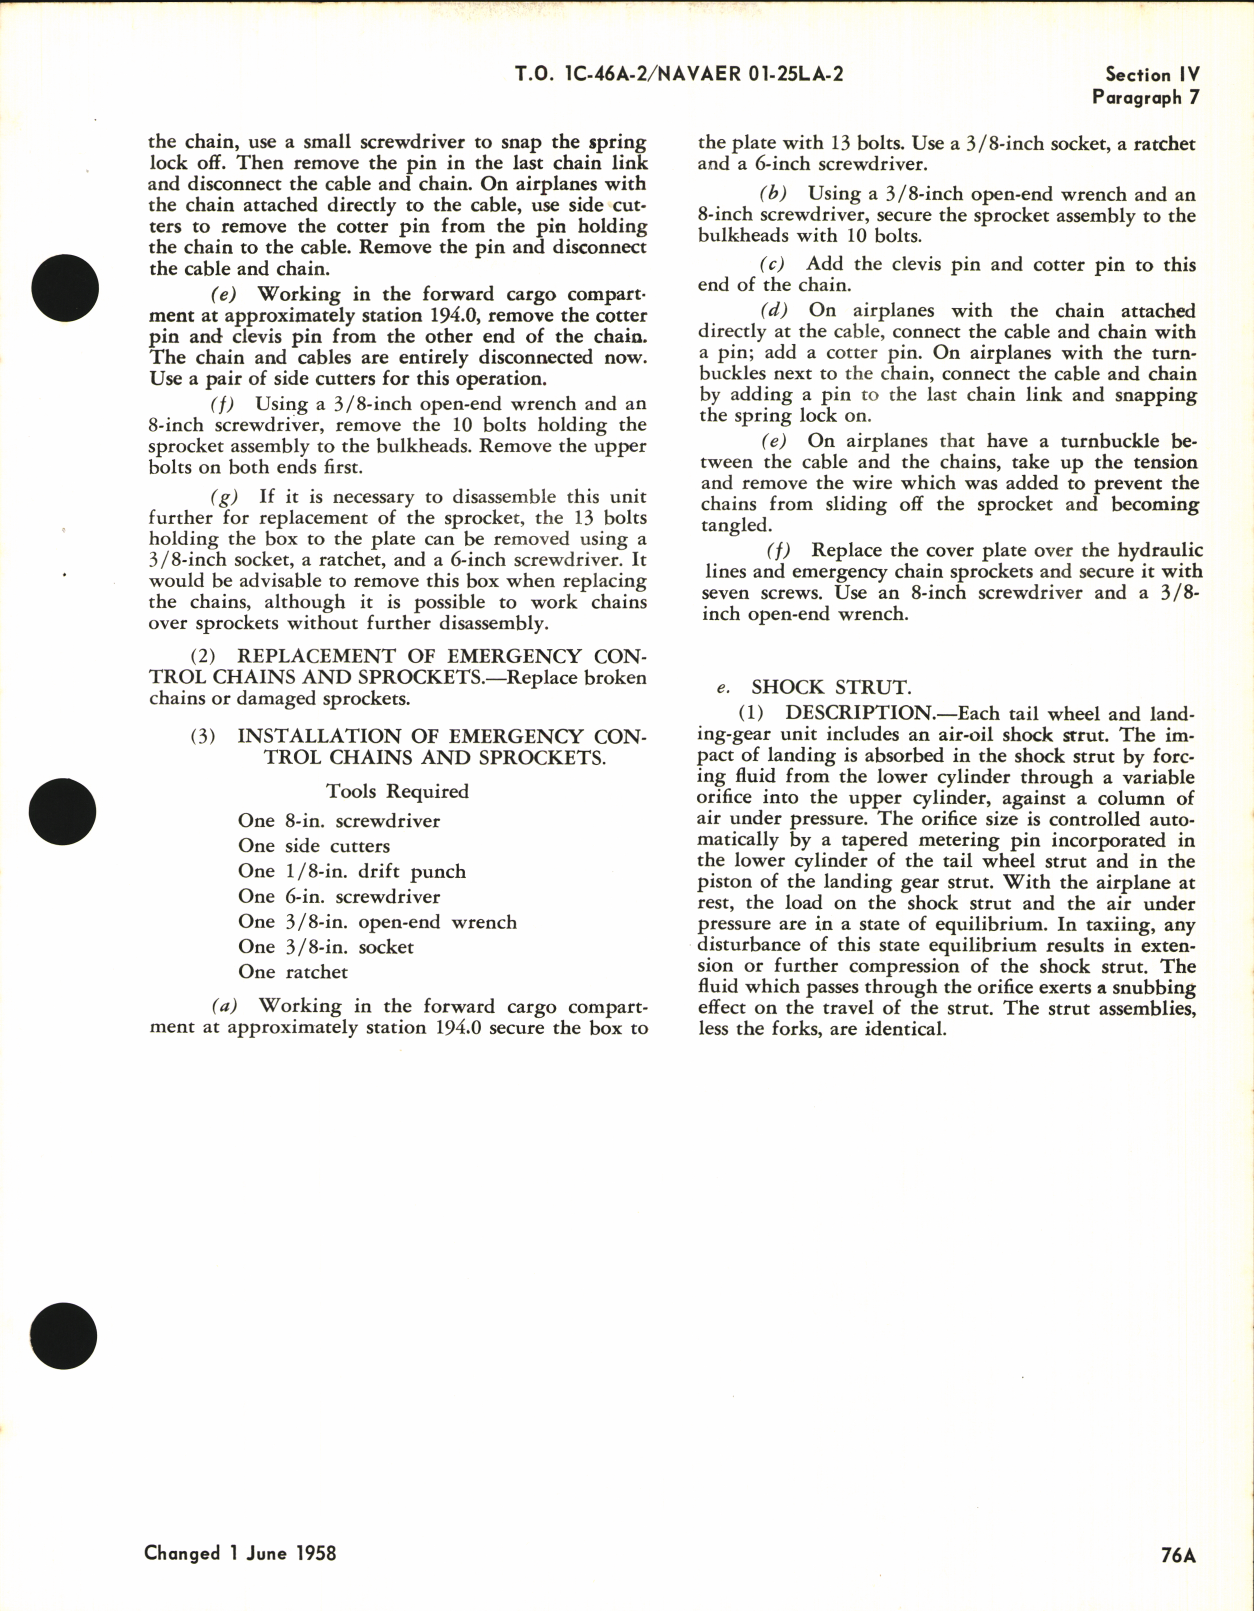 Sample page 7 from AirCorps Library document: Maintenance Instructions for C-46, ZC-46A, C-46D, C-46F, and R5C-1